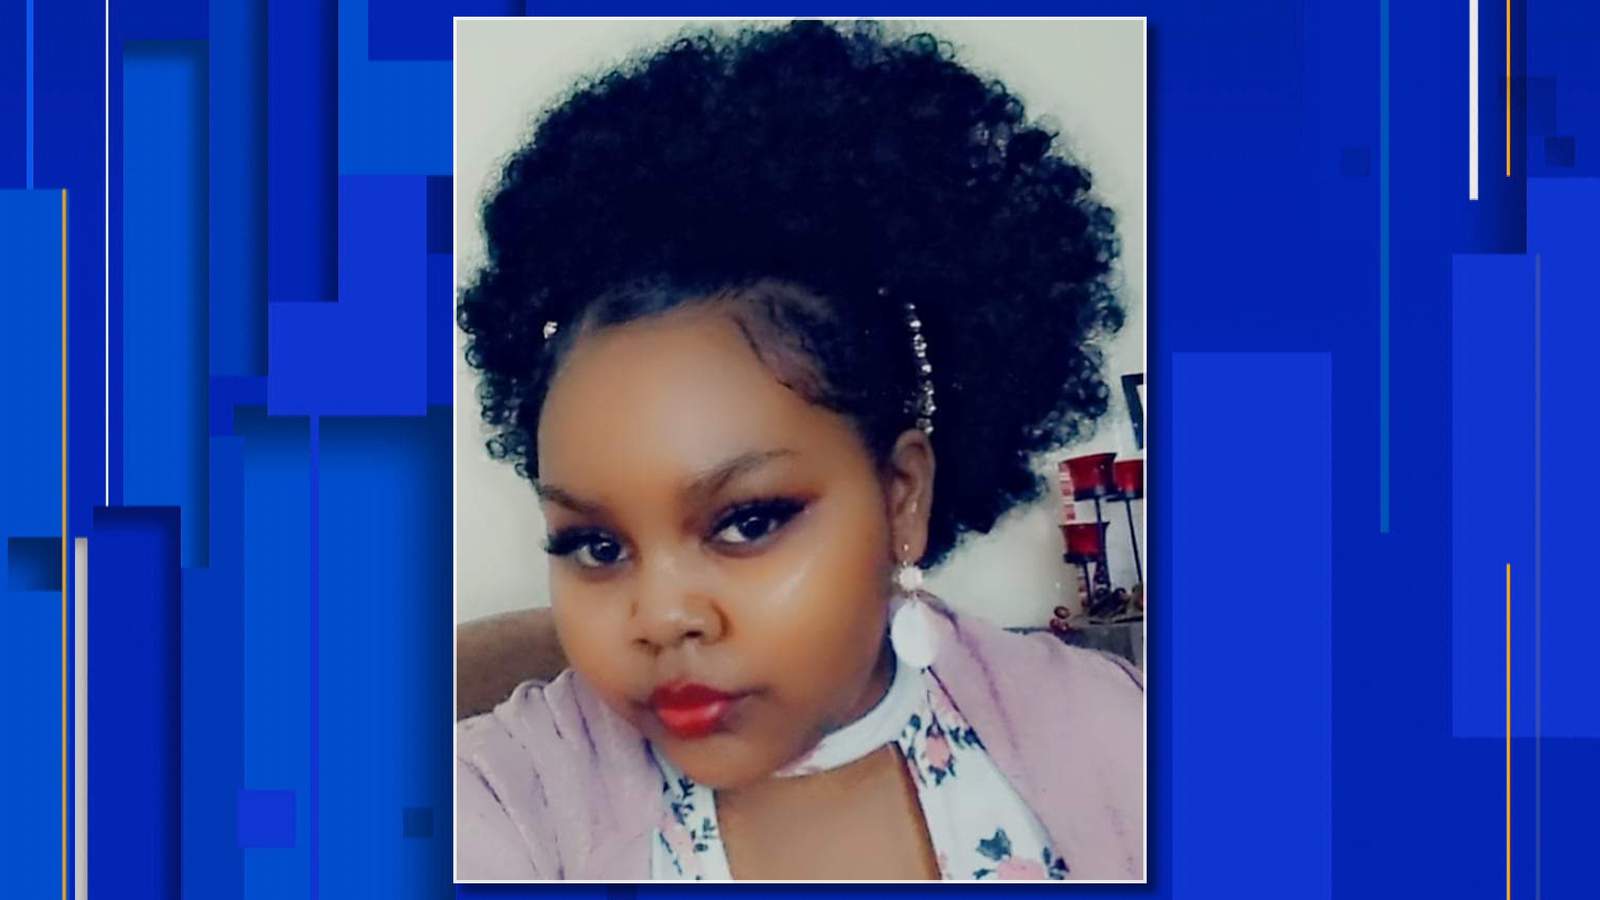 Detroit police: Missing 22-year-old woman has been located